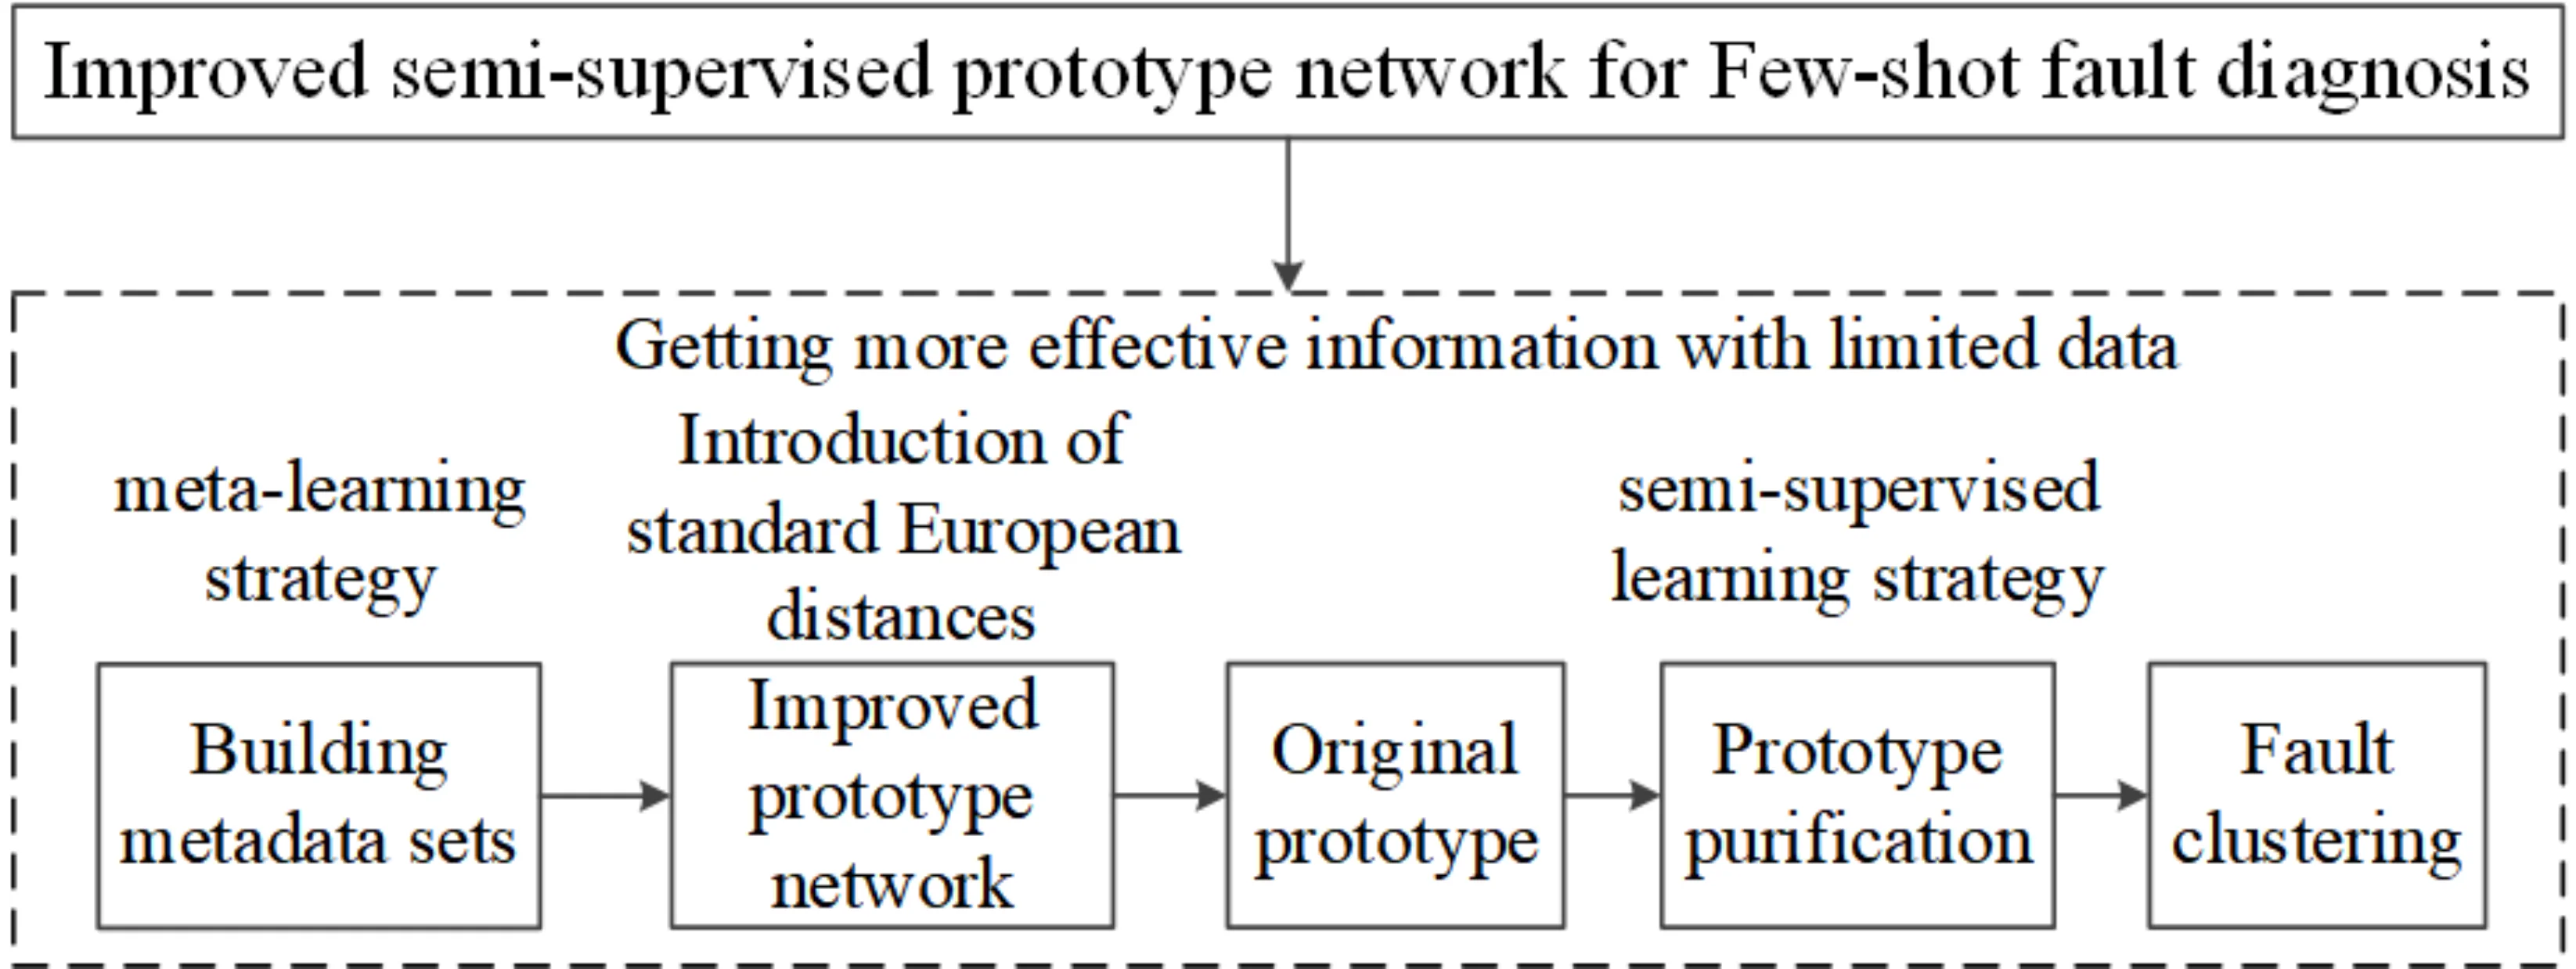 An improved semi-supervised prototype network for few-shot fault diagnosis